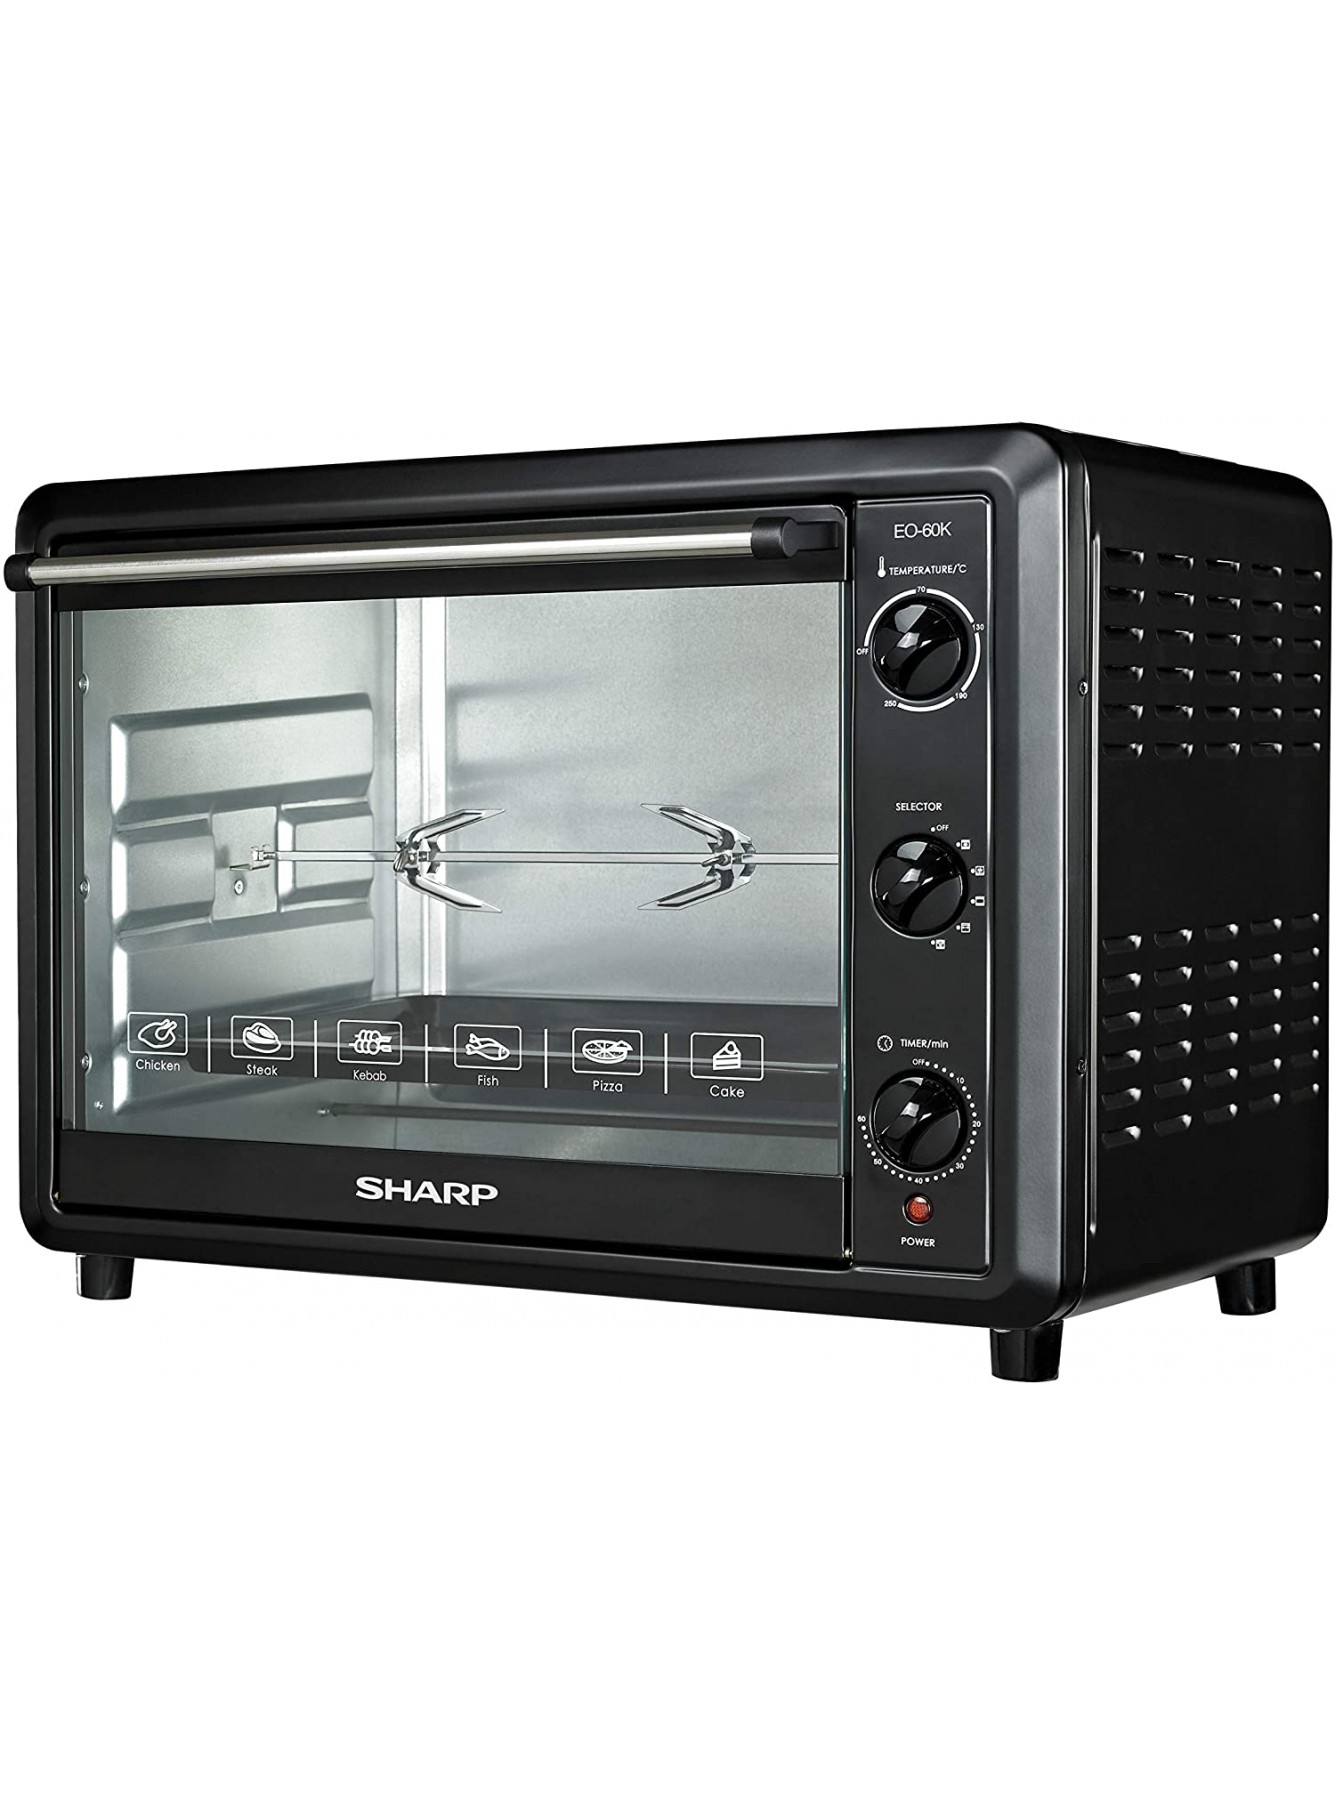 Sharp EO-60K-3 2000W Electric Toaster Oven with Convection Function 60-Liter 220V Non-USA Compliant B07MN5951S